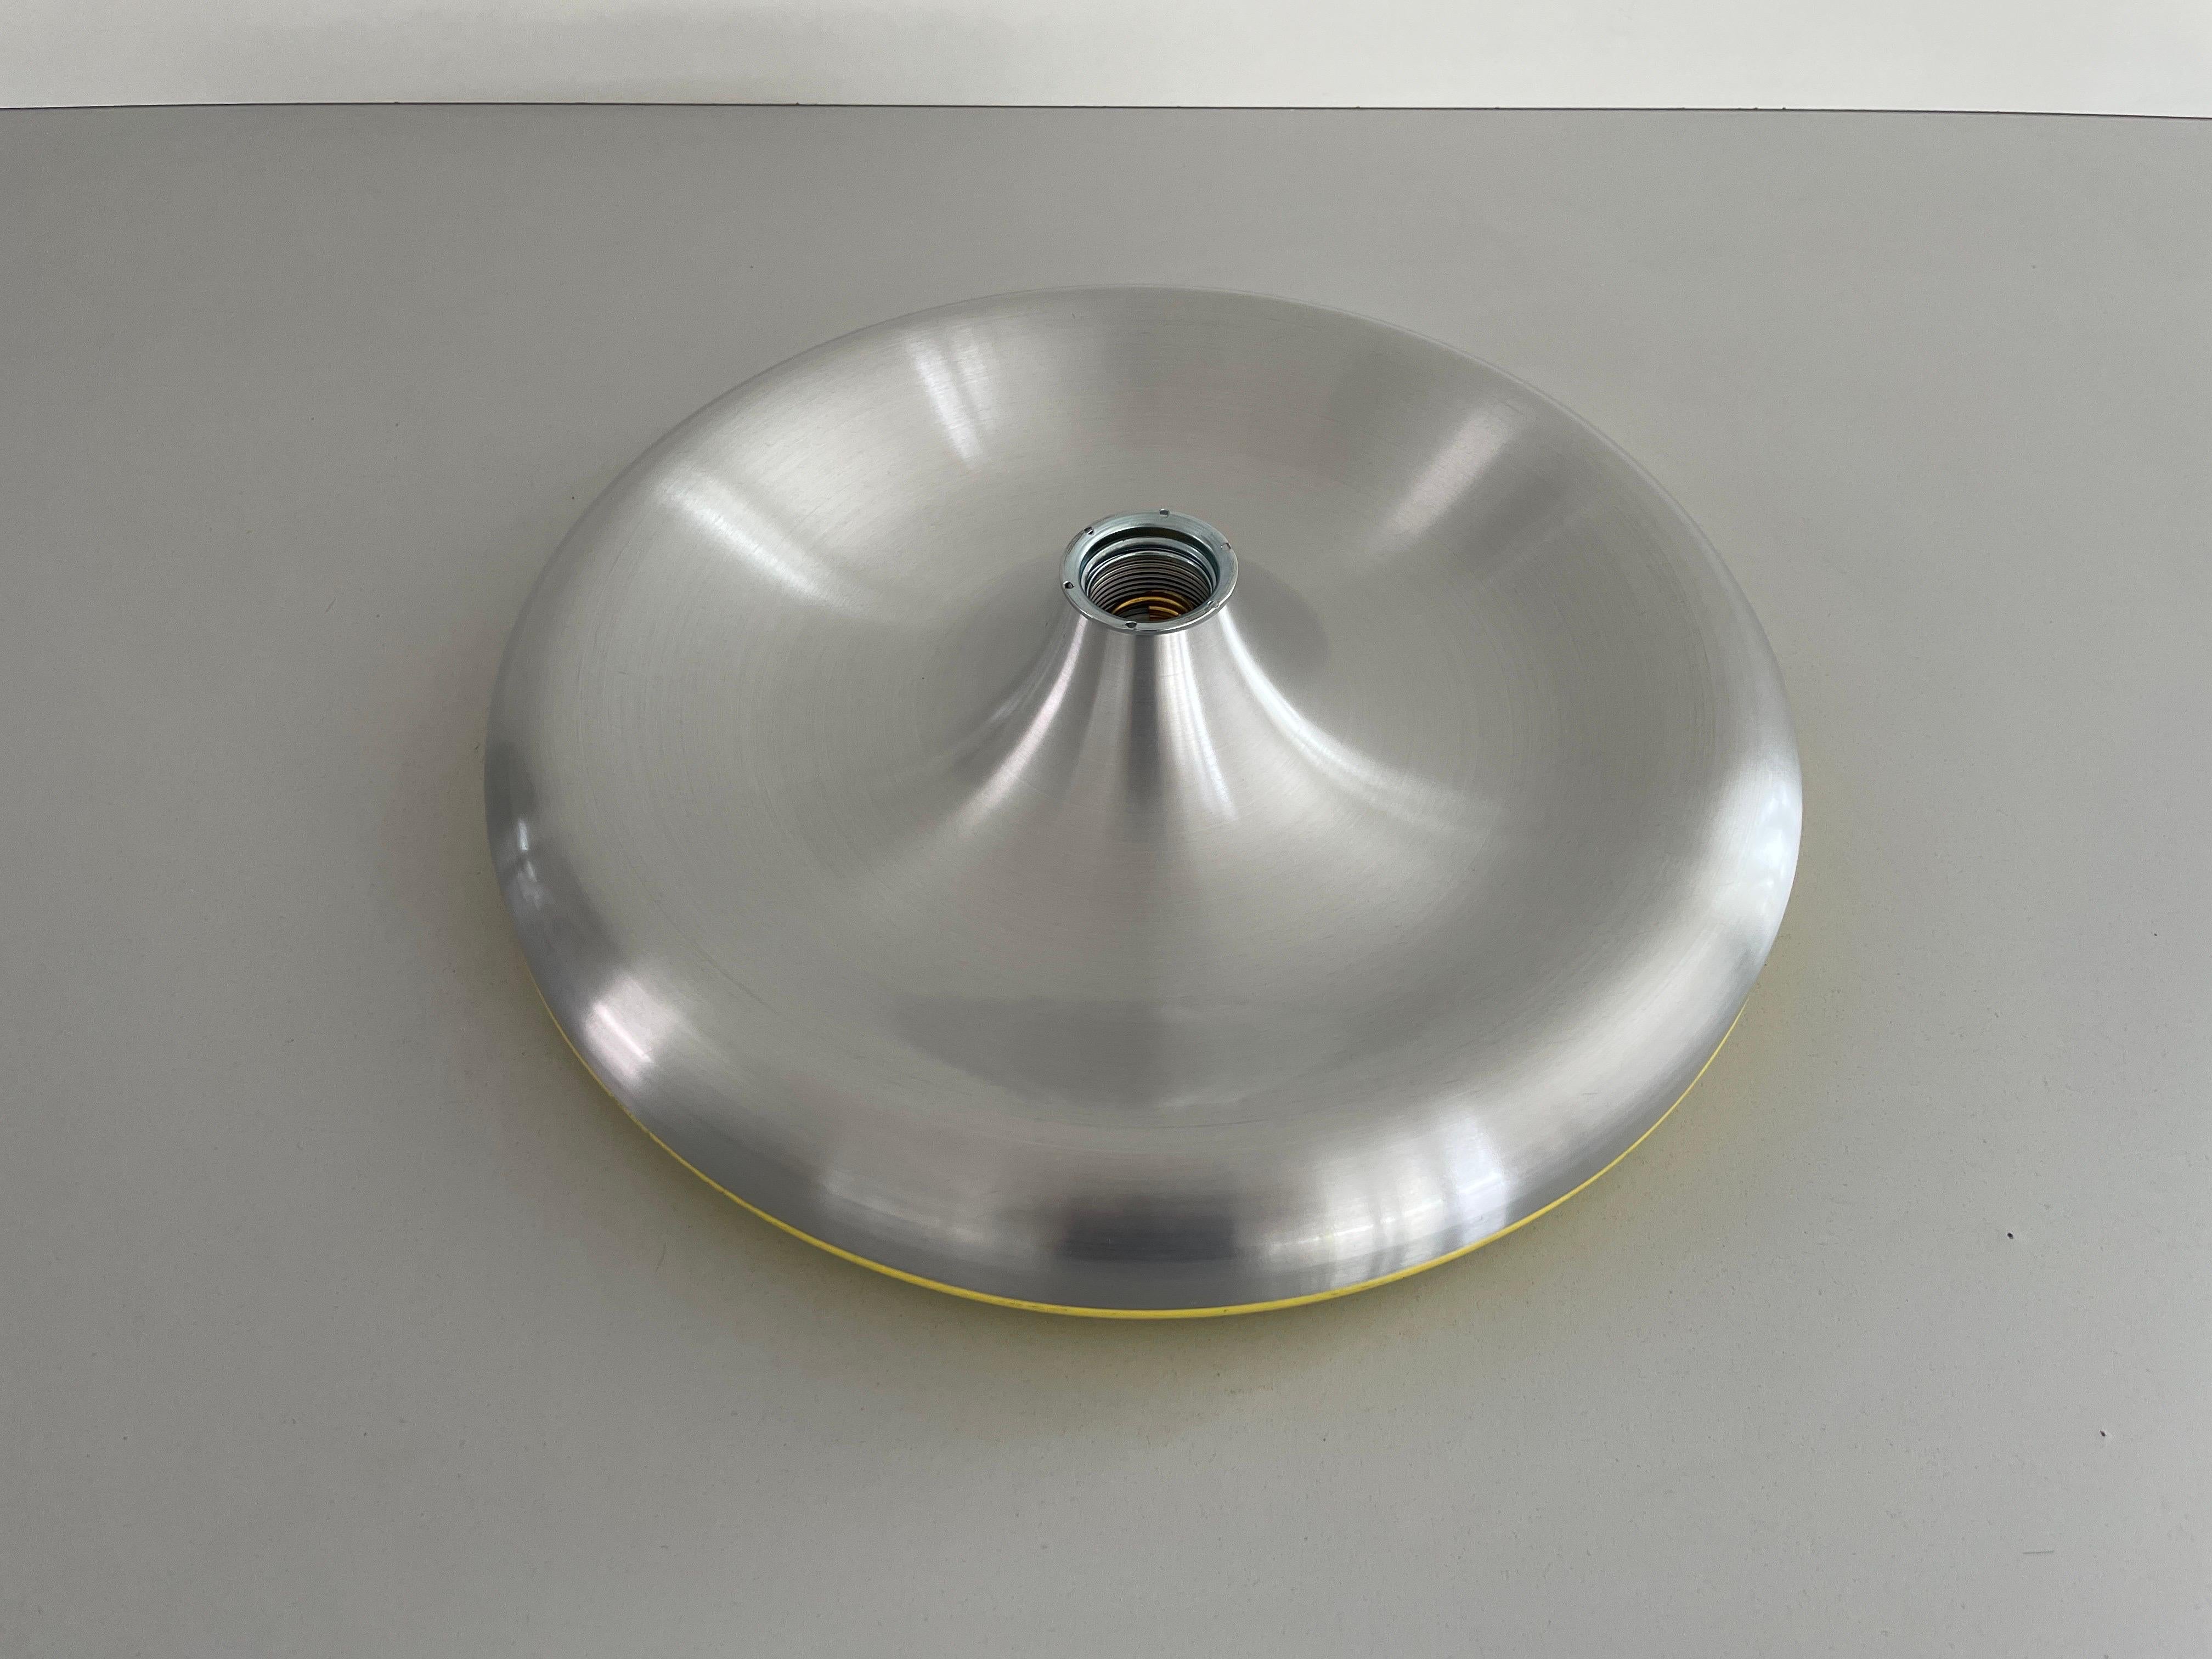 Metallic Grey and Yellow Space Age Flush Mount Ceiling Lamp, 1970s, Germany

Lampshade is in very good vintage condition.

This lamp works with E27 light bulbs. 
Wired and suitable to use with 220V and 110V for all